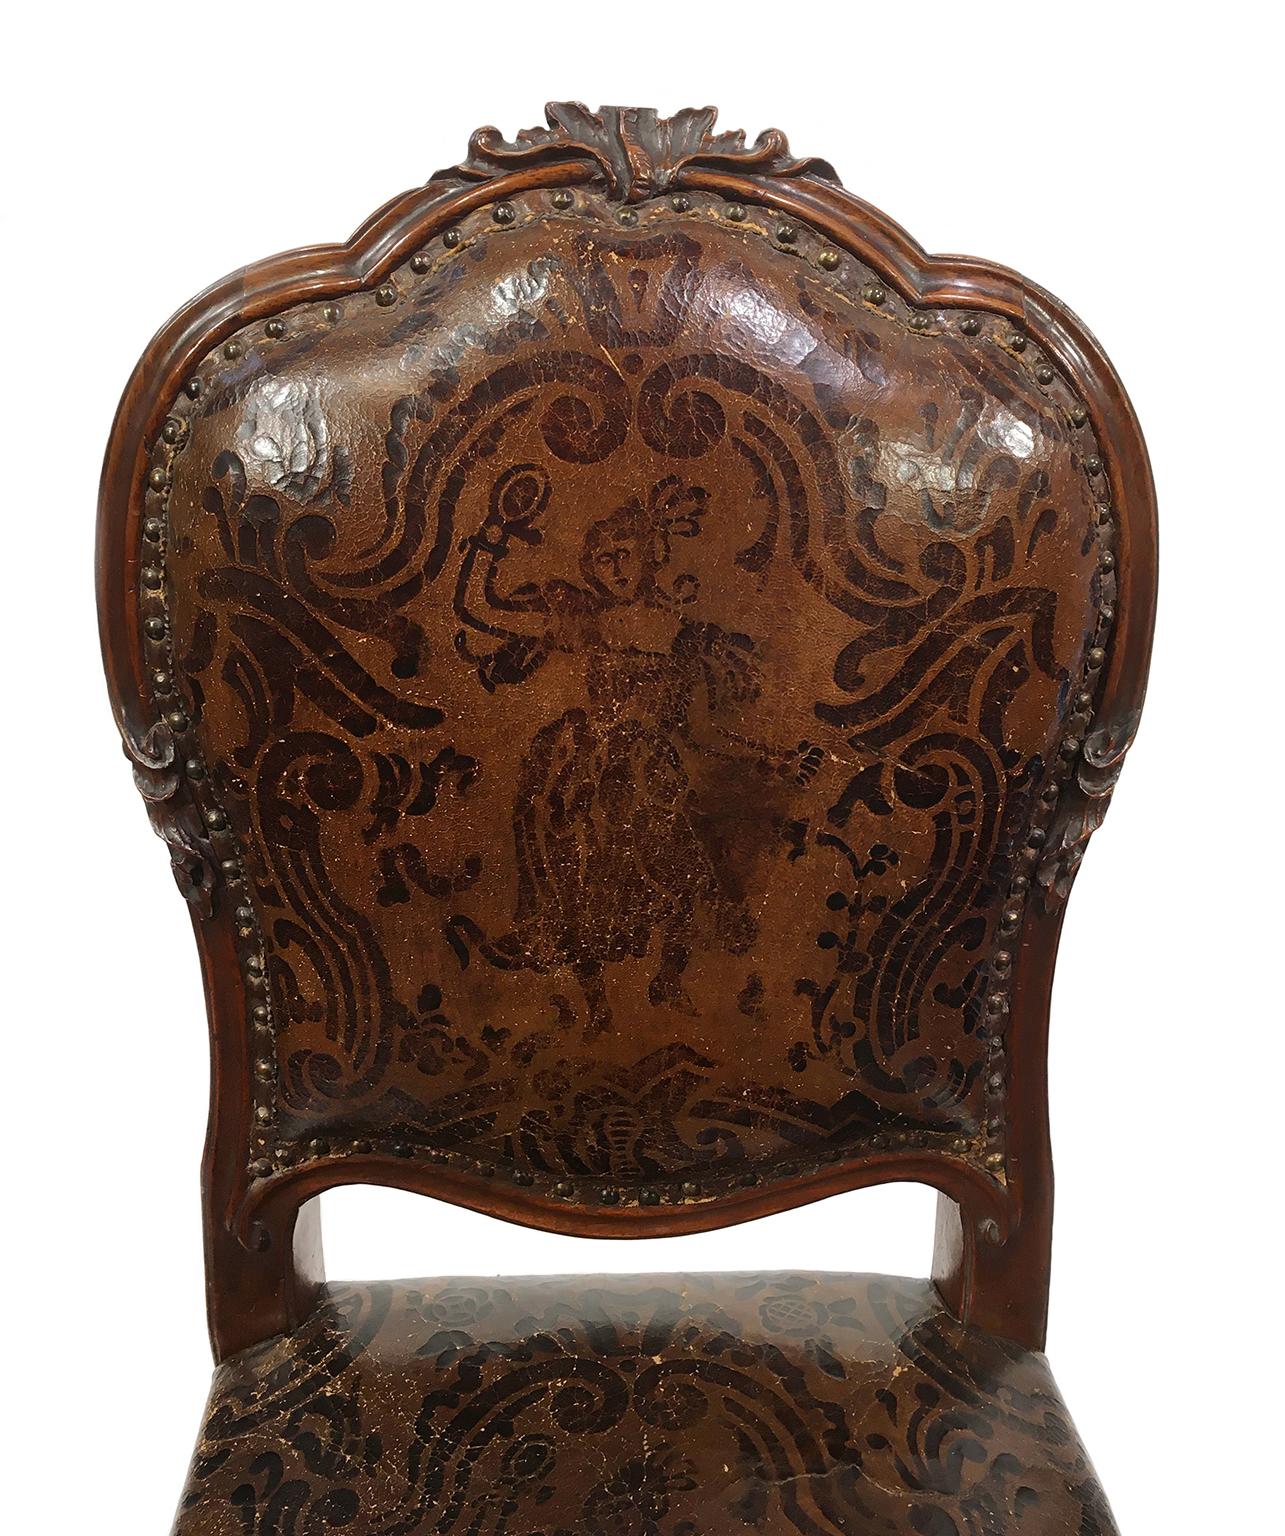 Italian Carved Walnut Chairs with Leather Covers, Milan, circa 1750 For Sale 4